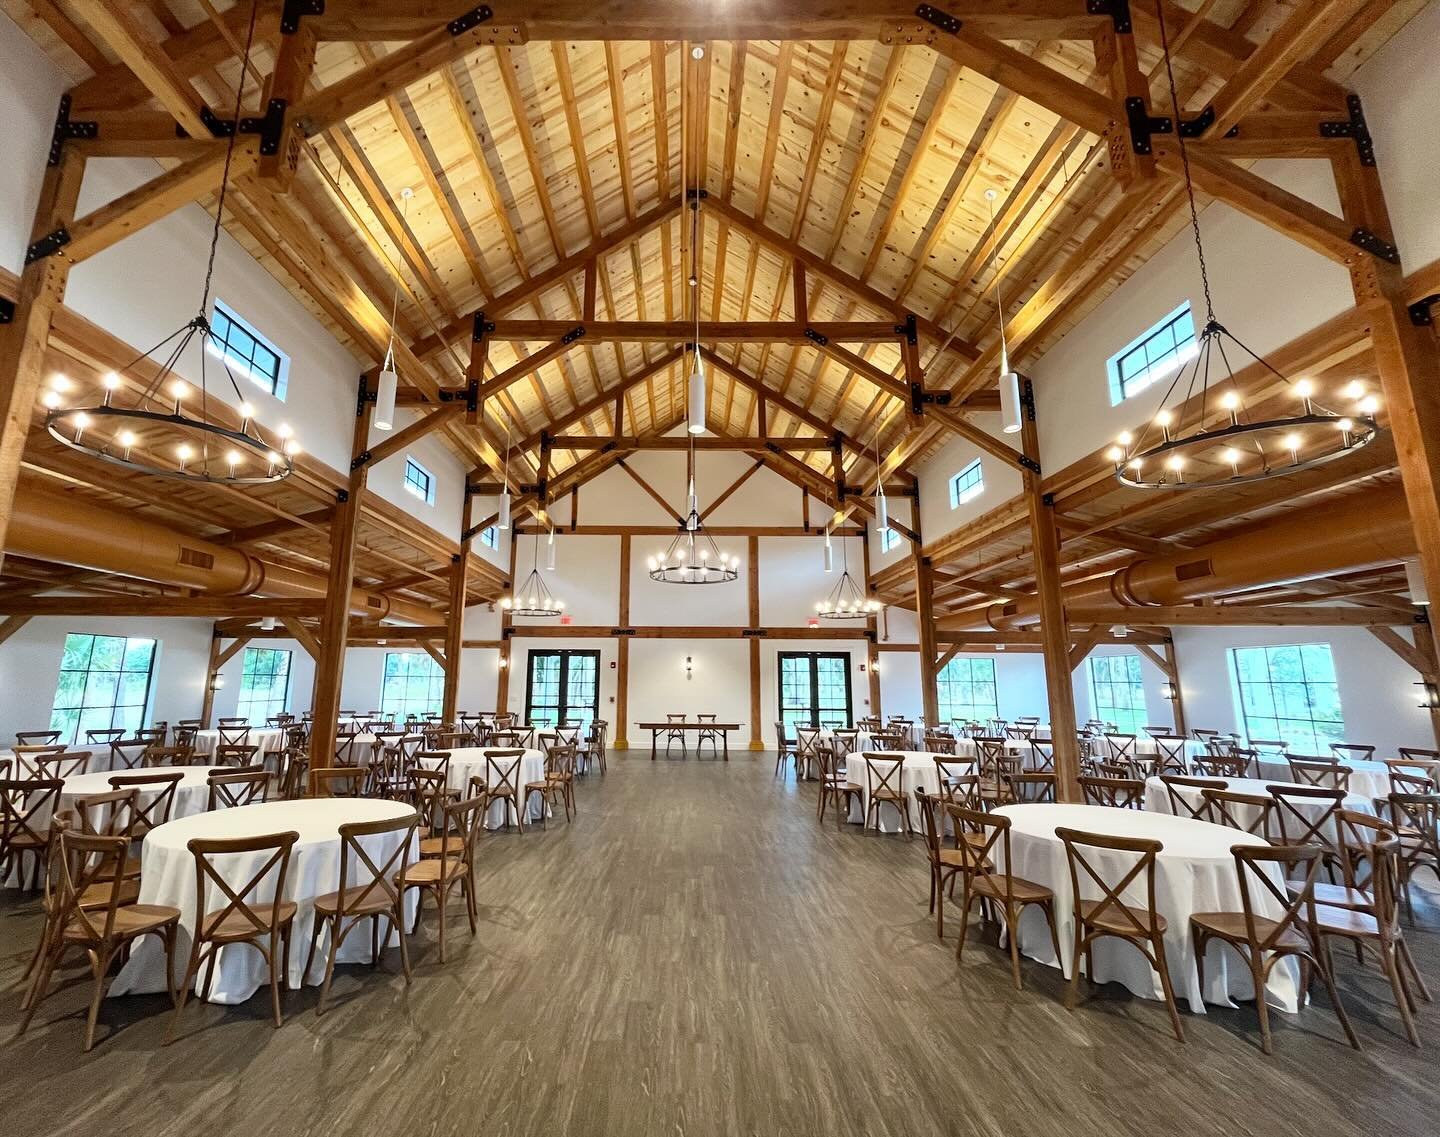 Our Air-Conditioned Reception Hall 🤍 We have room to host weddings and events for up to 200 guests with room for dancing! 

Linens: @fabulousandfancyevents